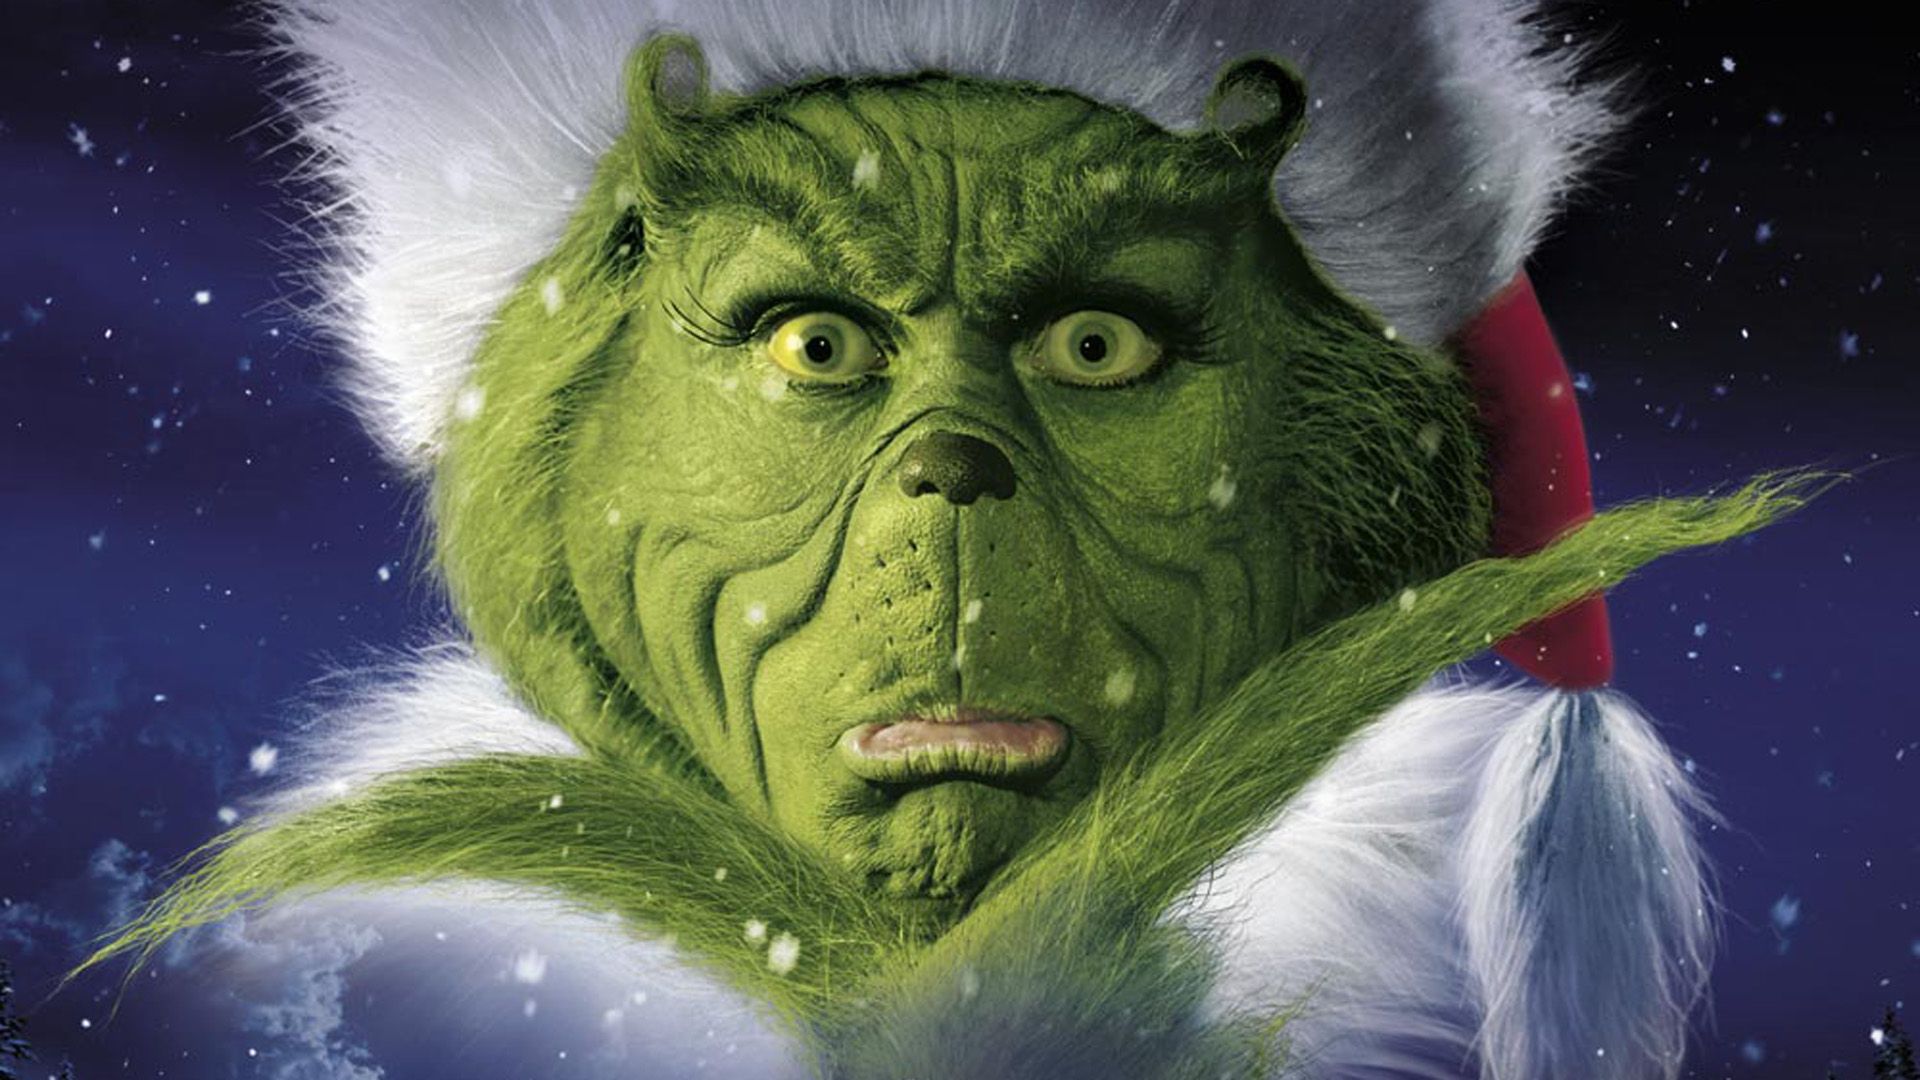 Union Films - Review - The Grinch